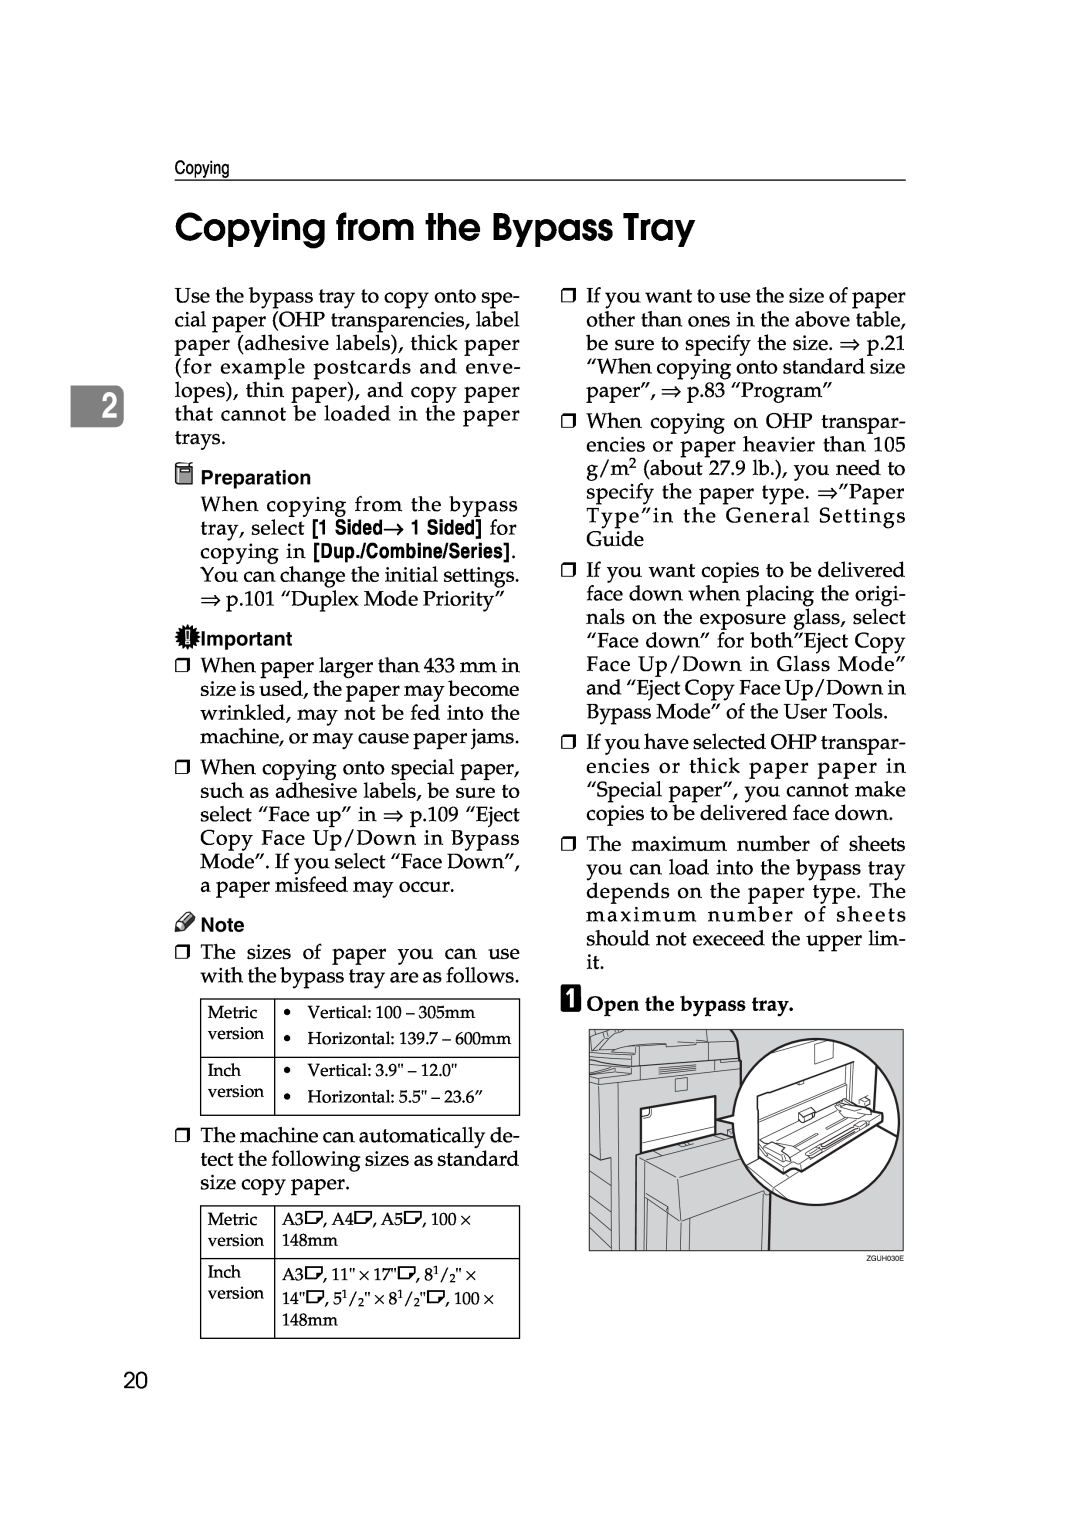 Ricoh IS 2075, IS 2060 operating instructions Copying from the Bypass Tray, Preparation, AOpen the bypass tray 